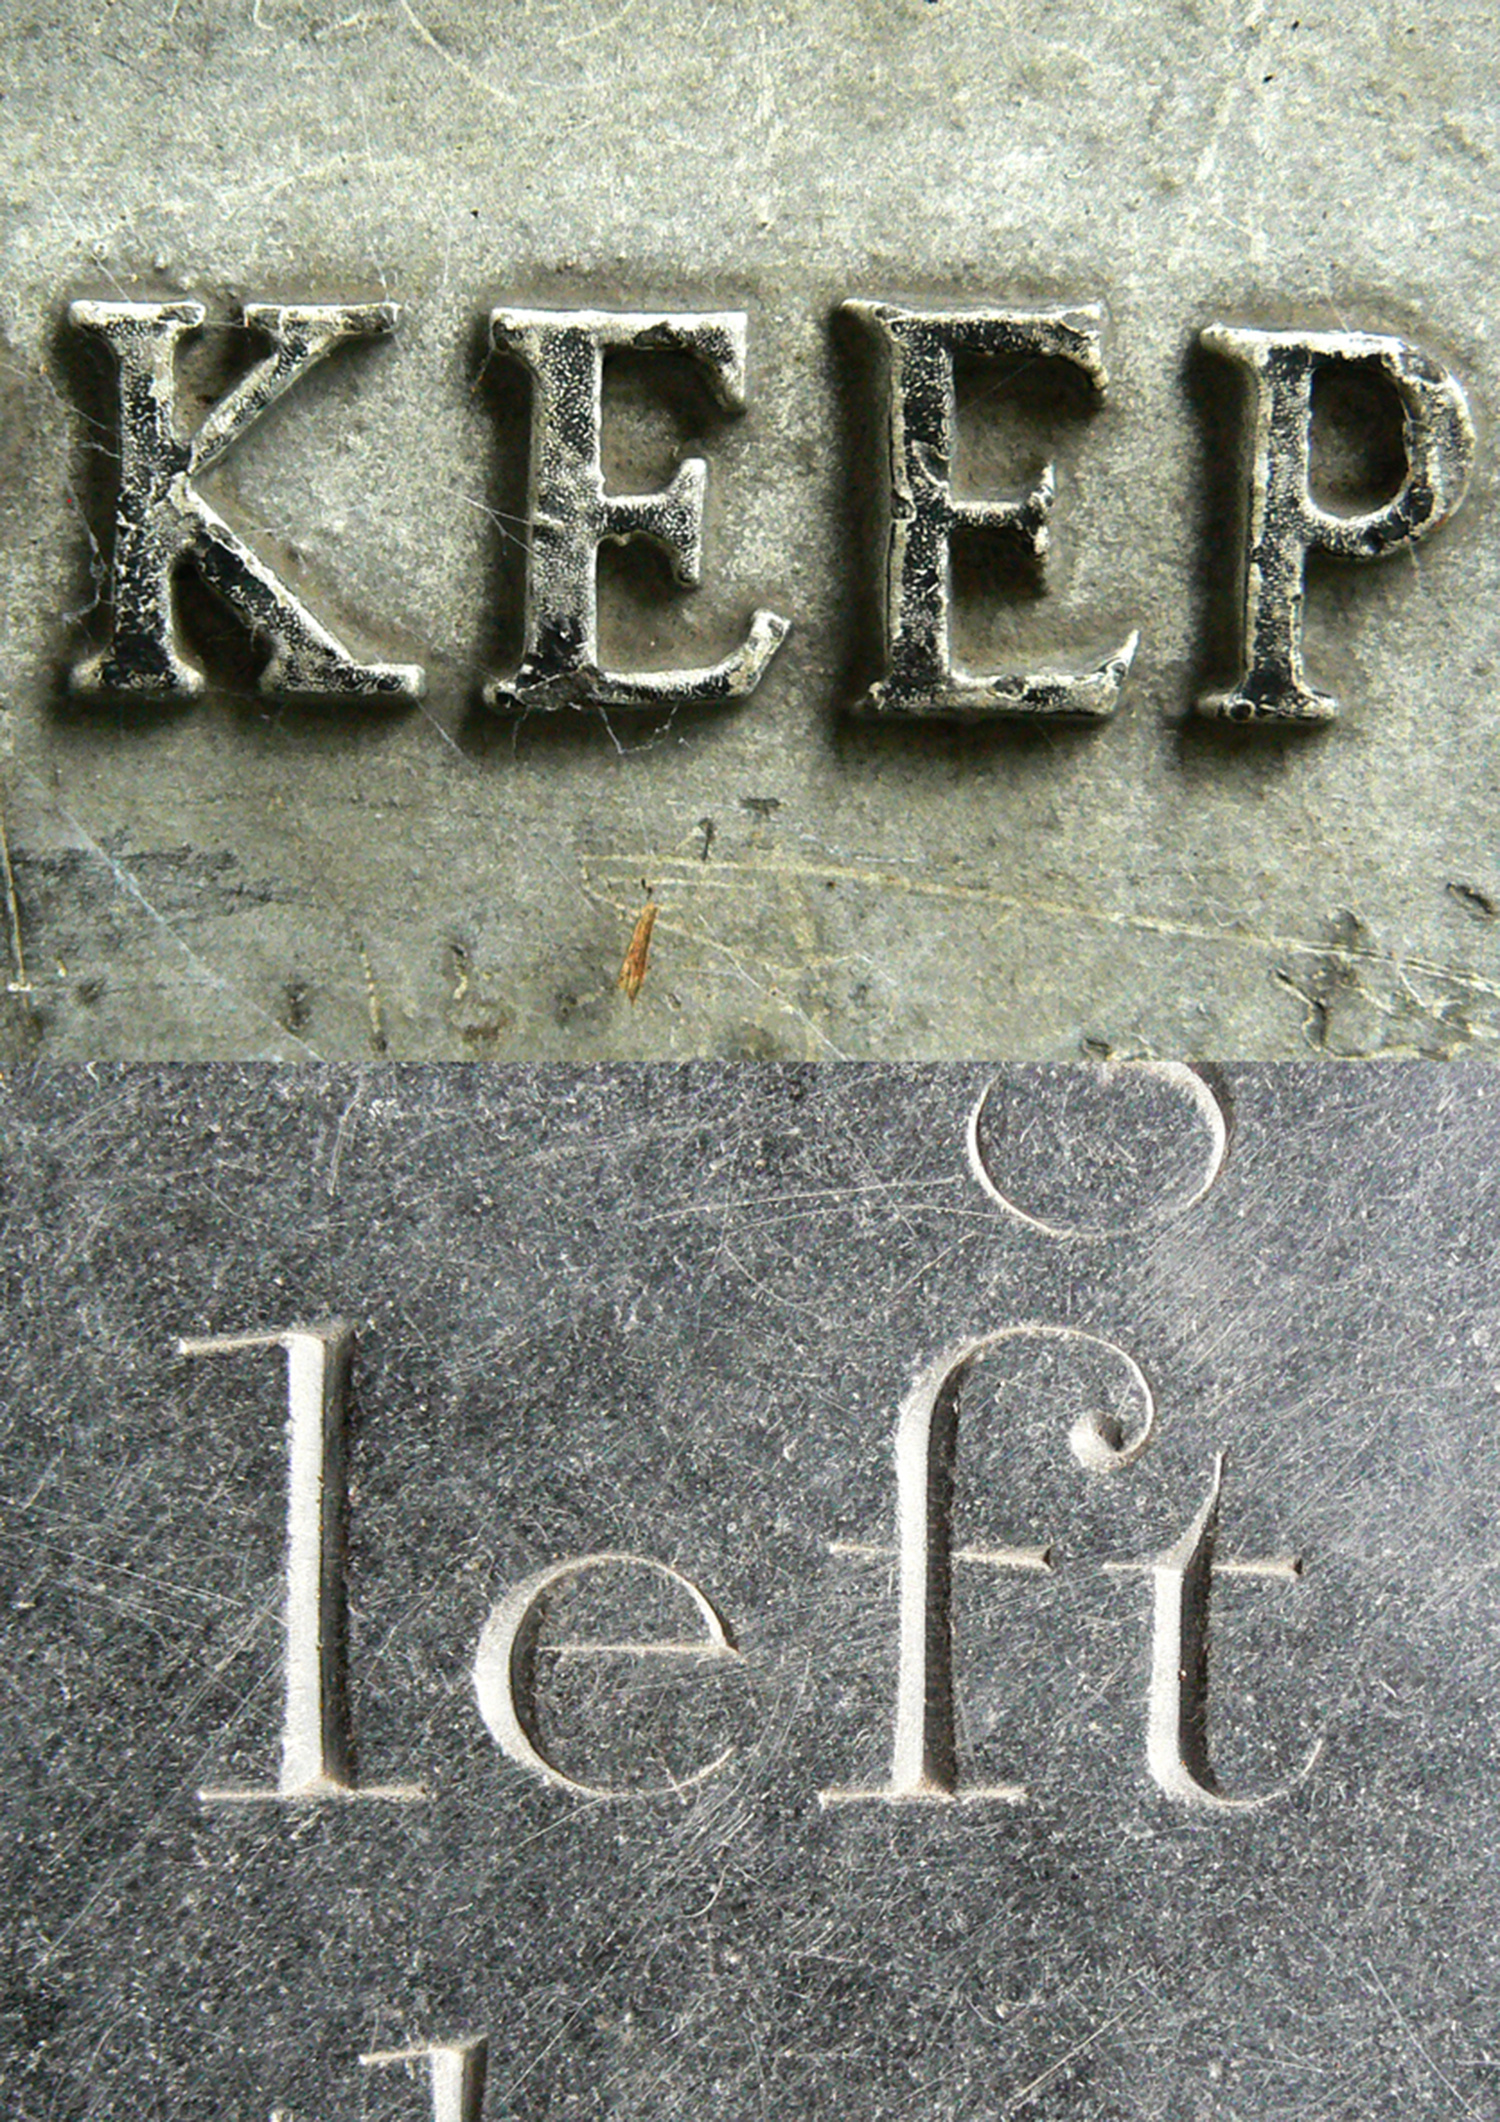 Keep Left by Phil Gray